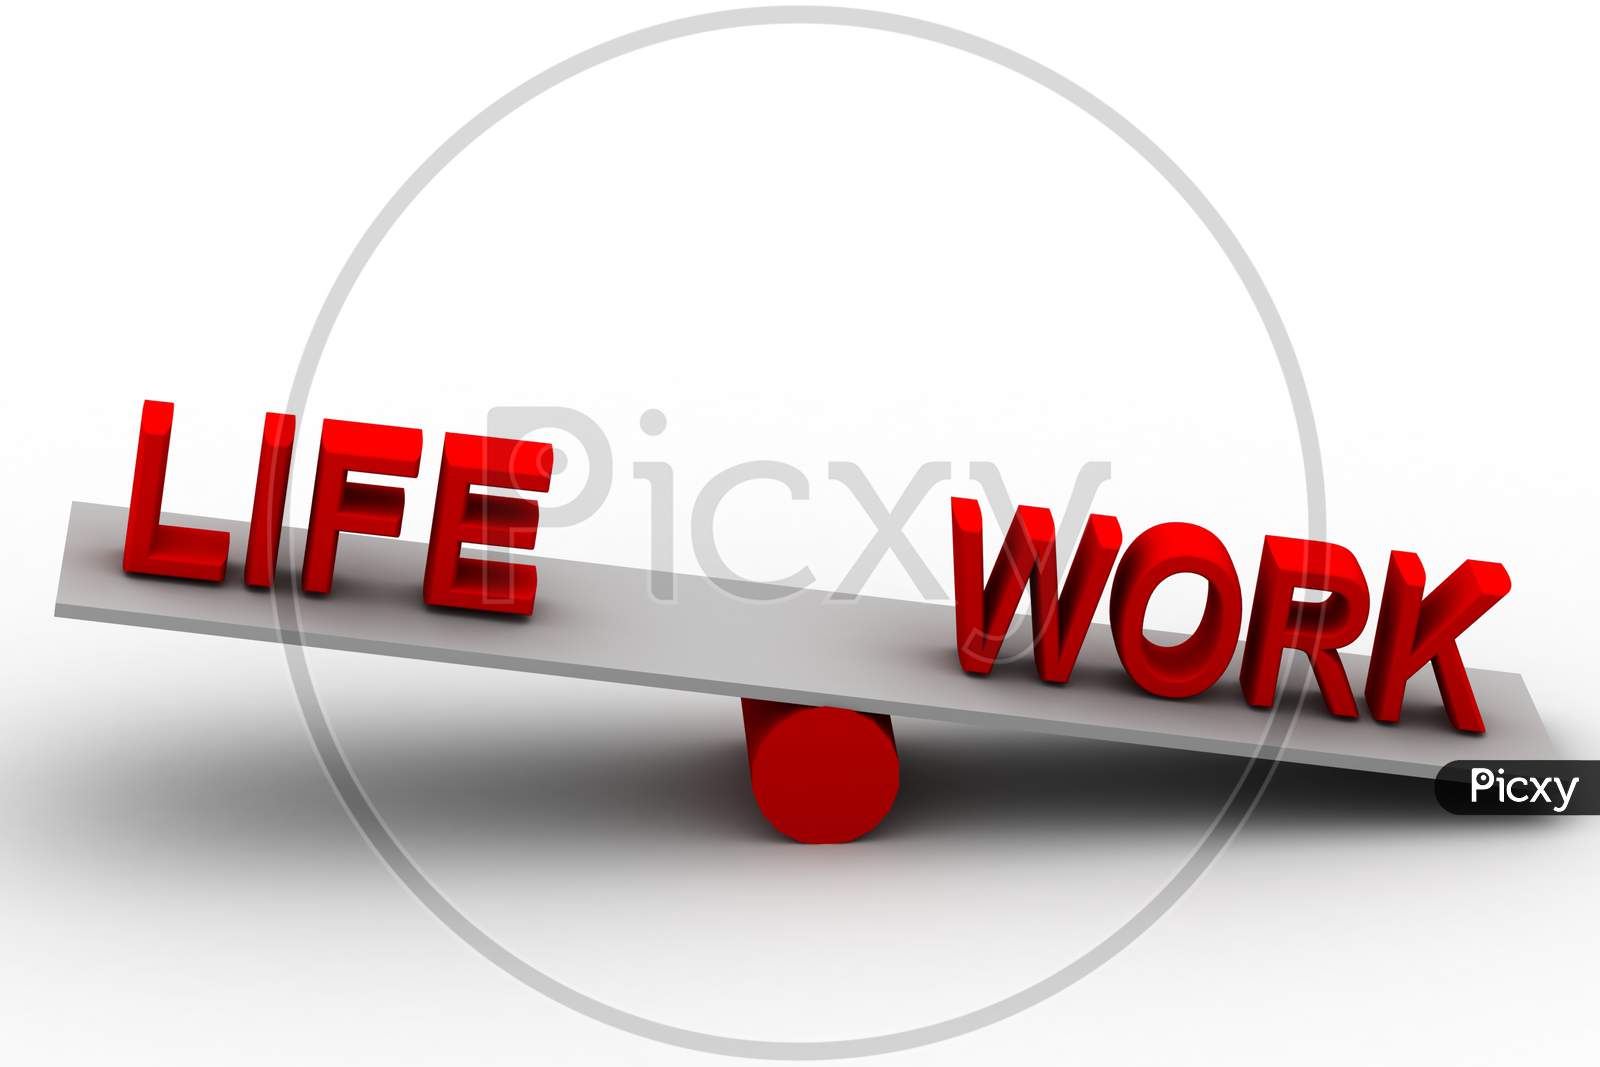 Concept of Life vs Work